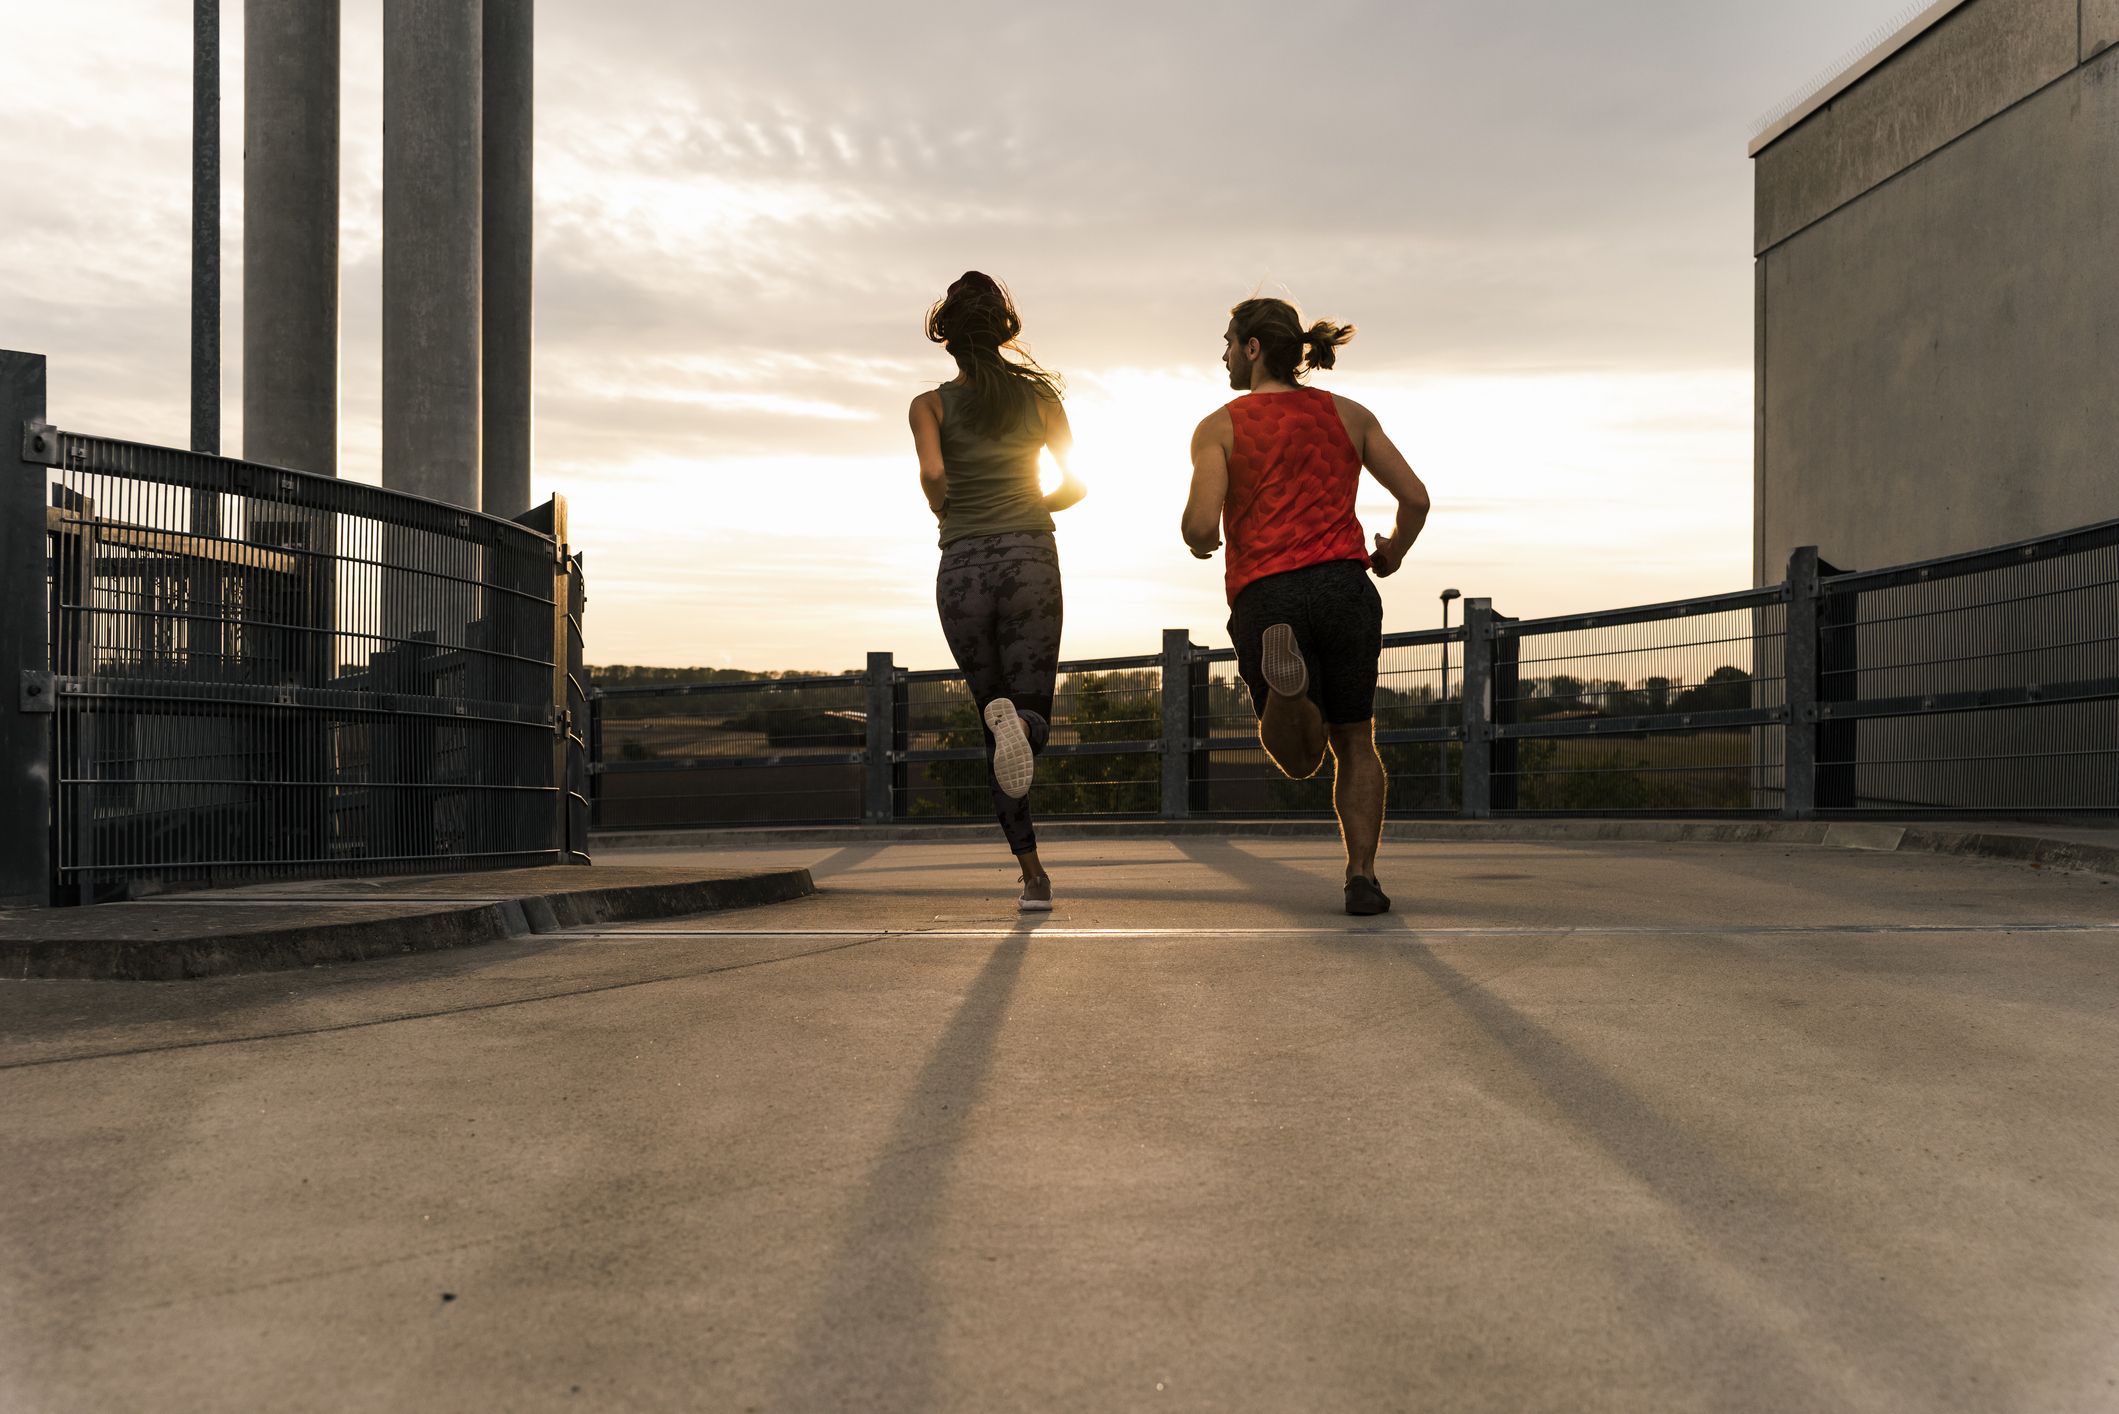 Interval Training Workouts Build Speed and Endurance